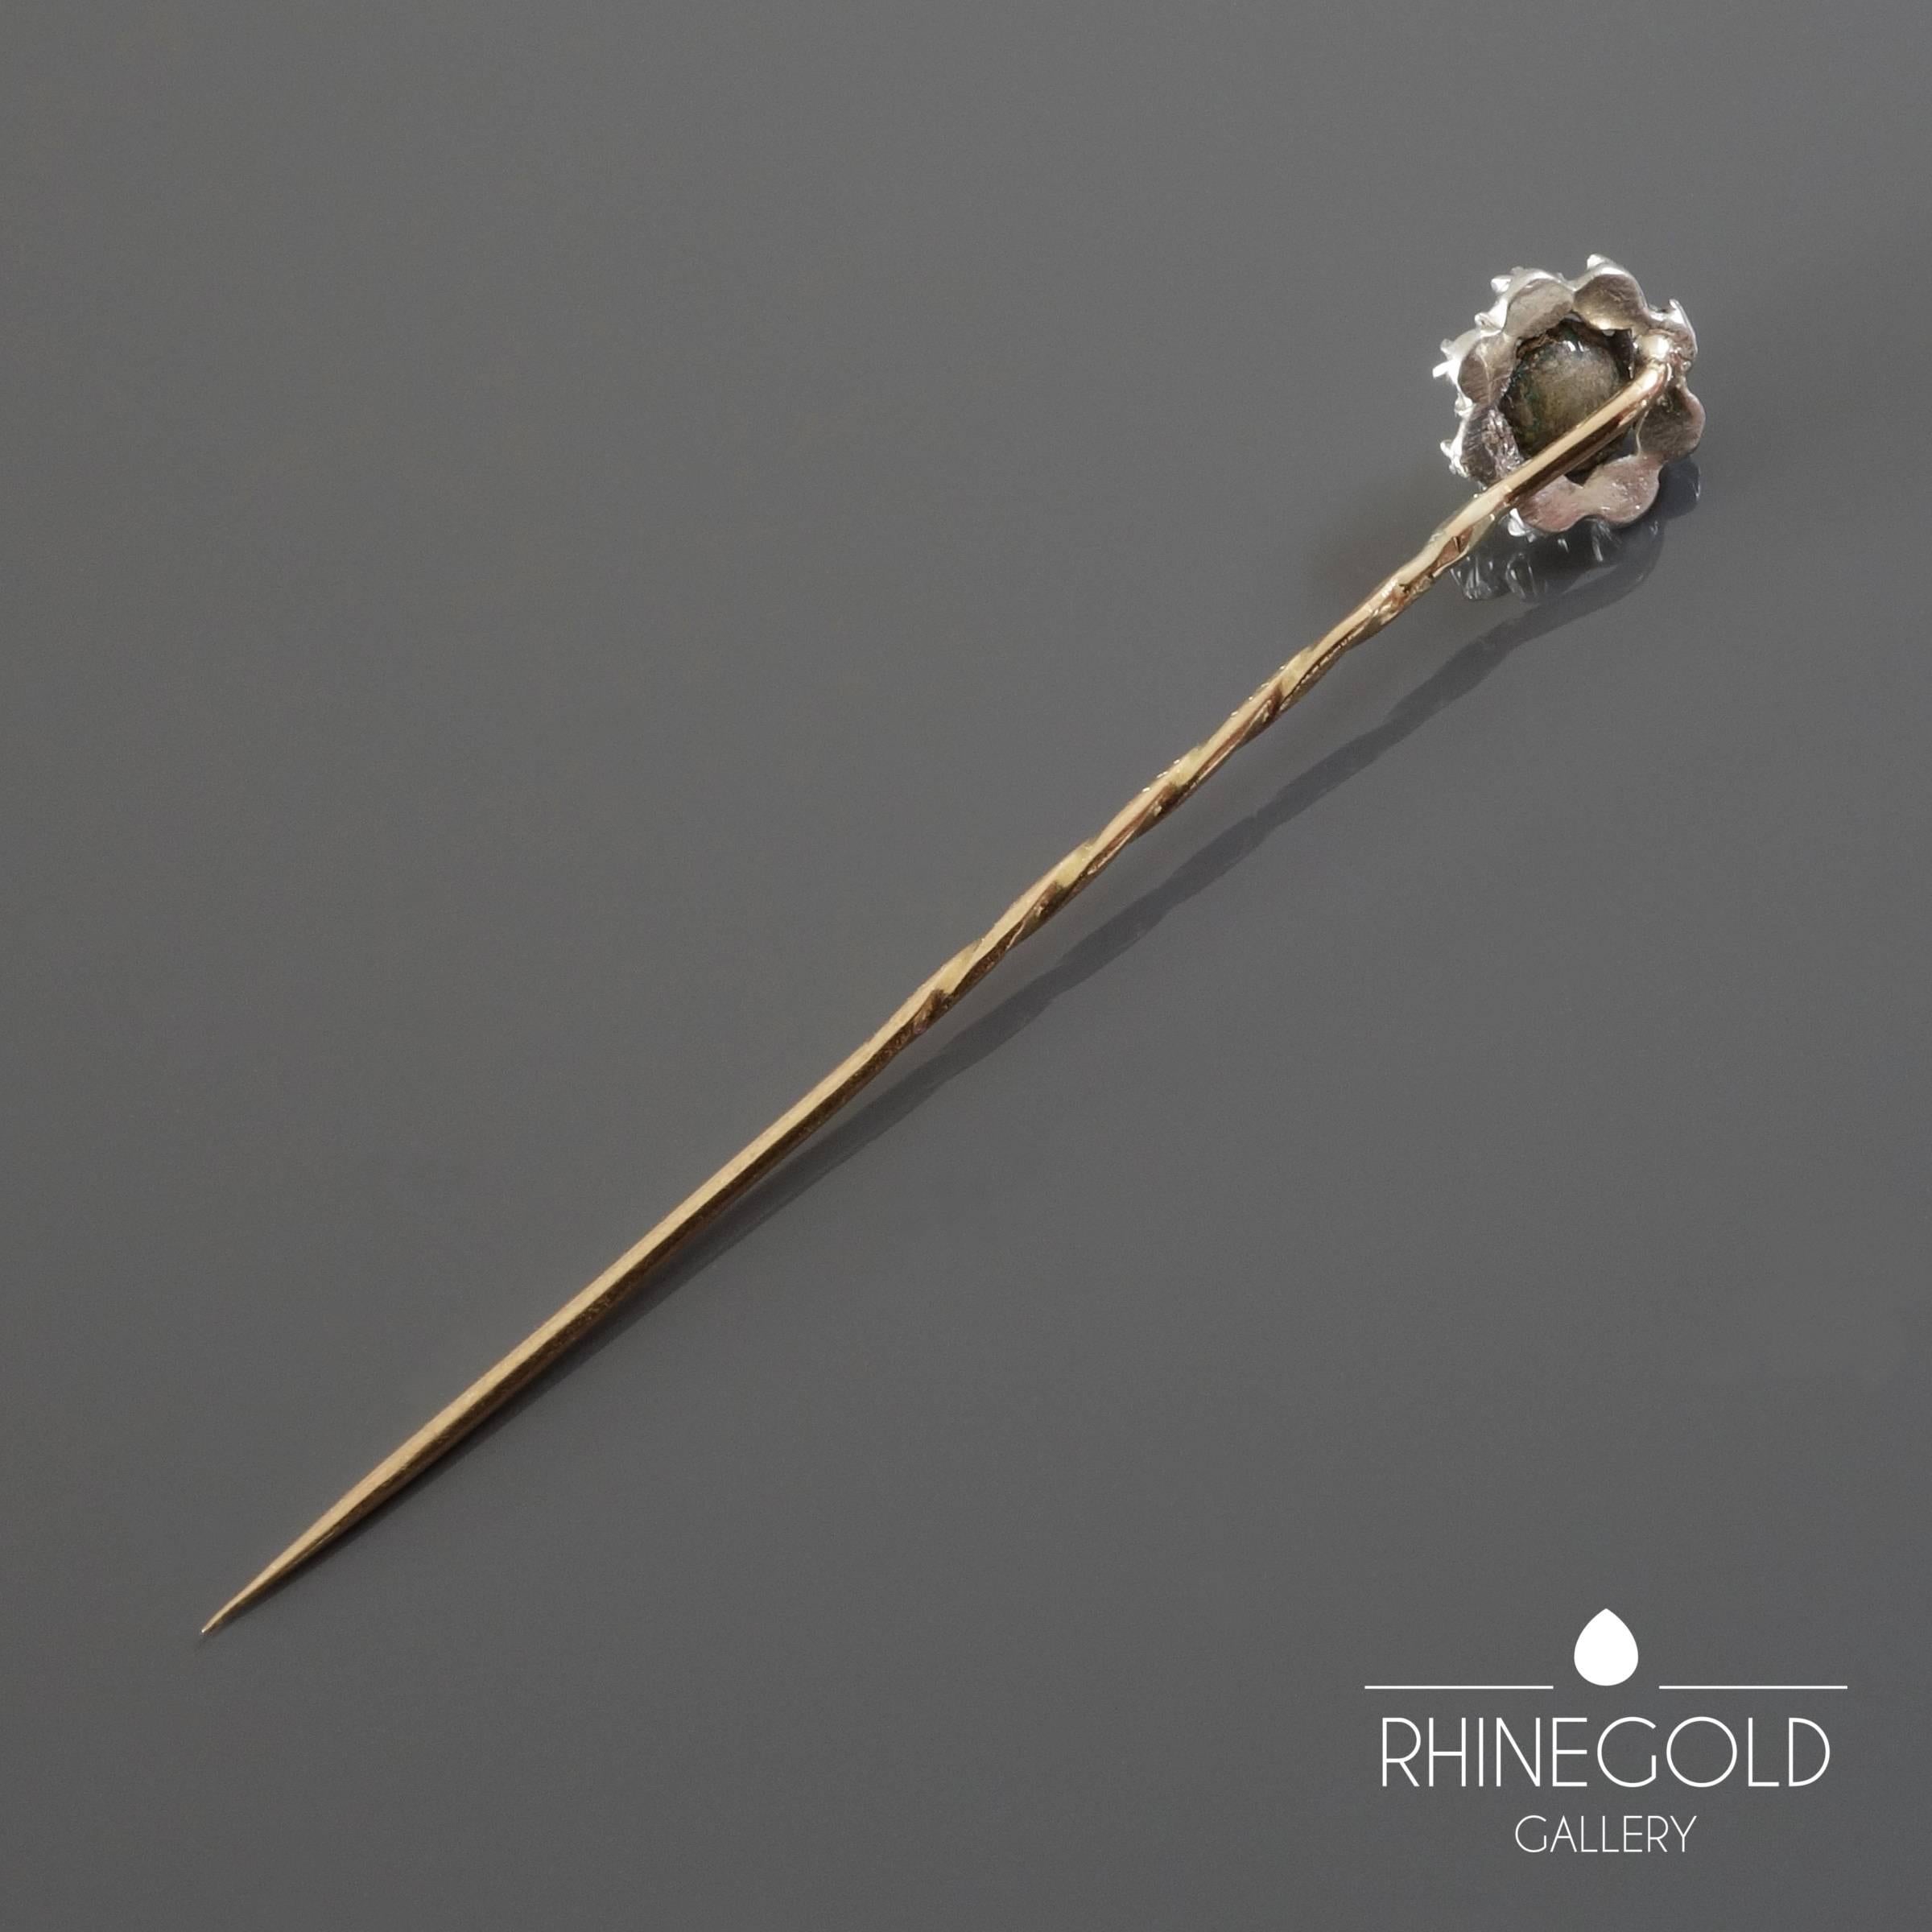 Antique Georgian Rose Cut Diamond Gold Silver Stick Pin
14K yellow gold, silver
Length 6.1 cm (approx. 2 3/8"), diameter of head 0.9 cm (approx. 3/8"), visible part of rose-cut diamond approx. 4.0 to 3.5 mm
Marks: none
Continental,